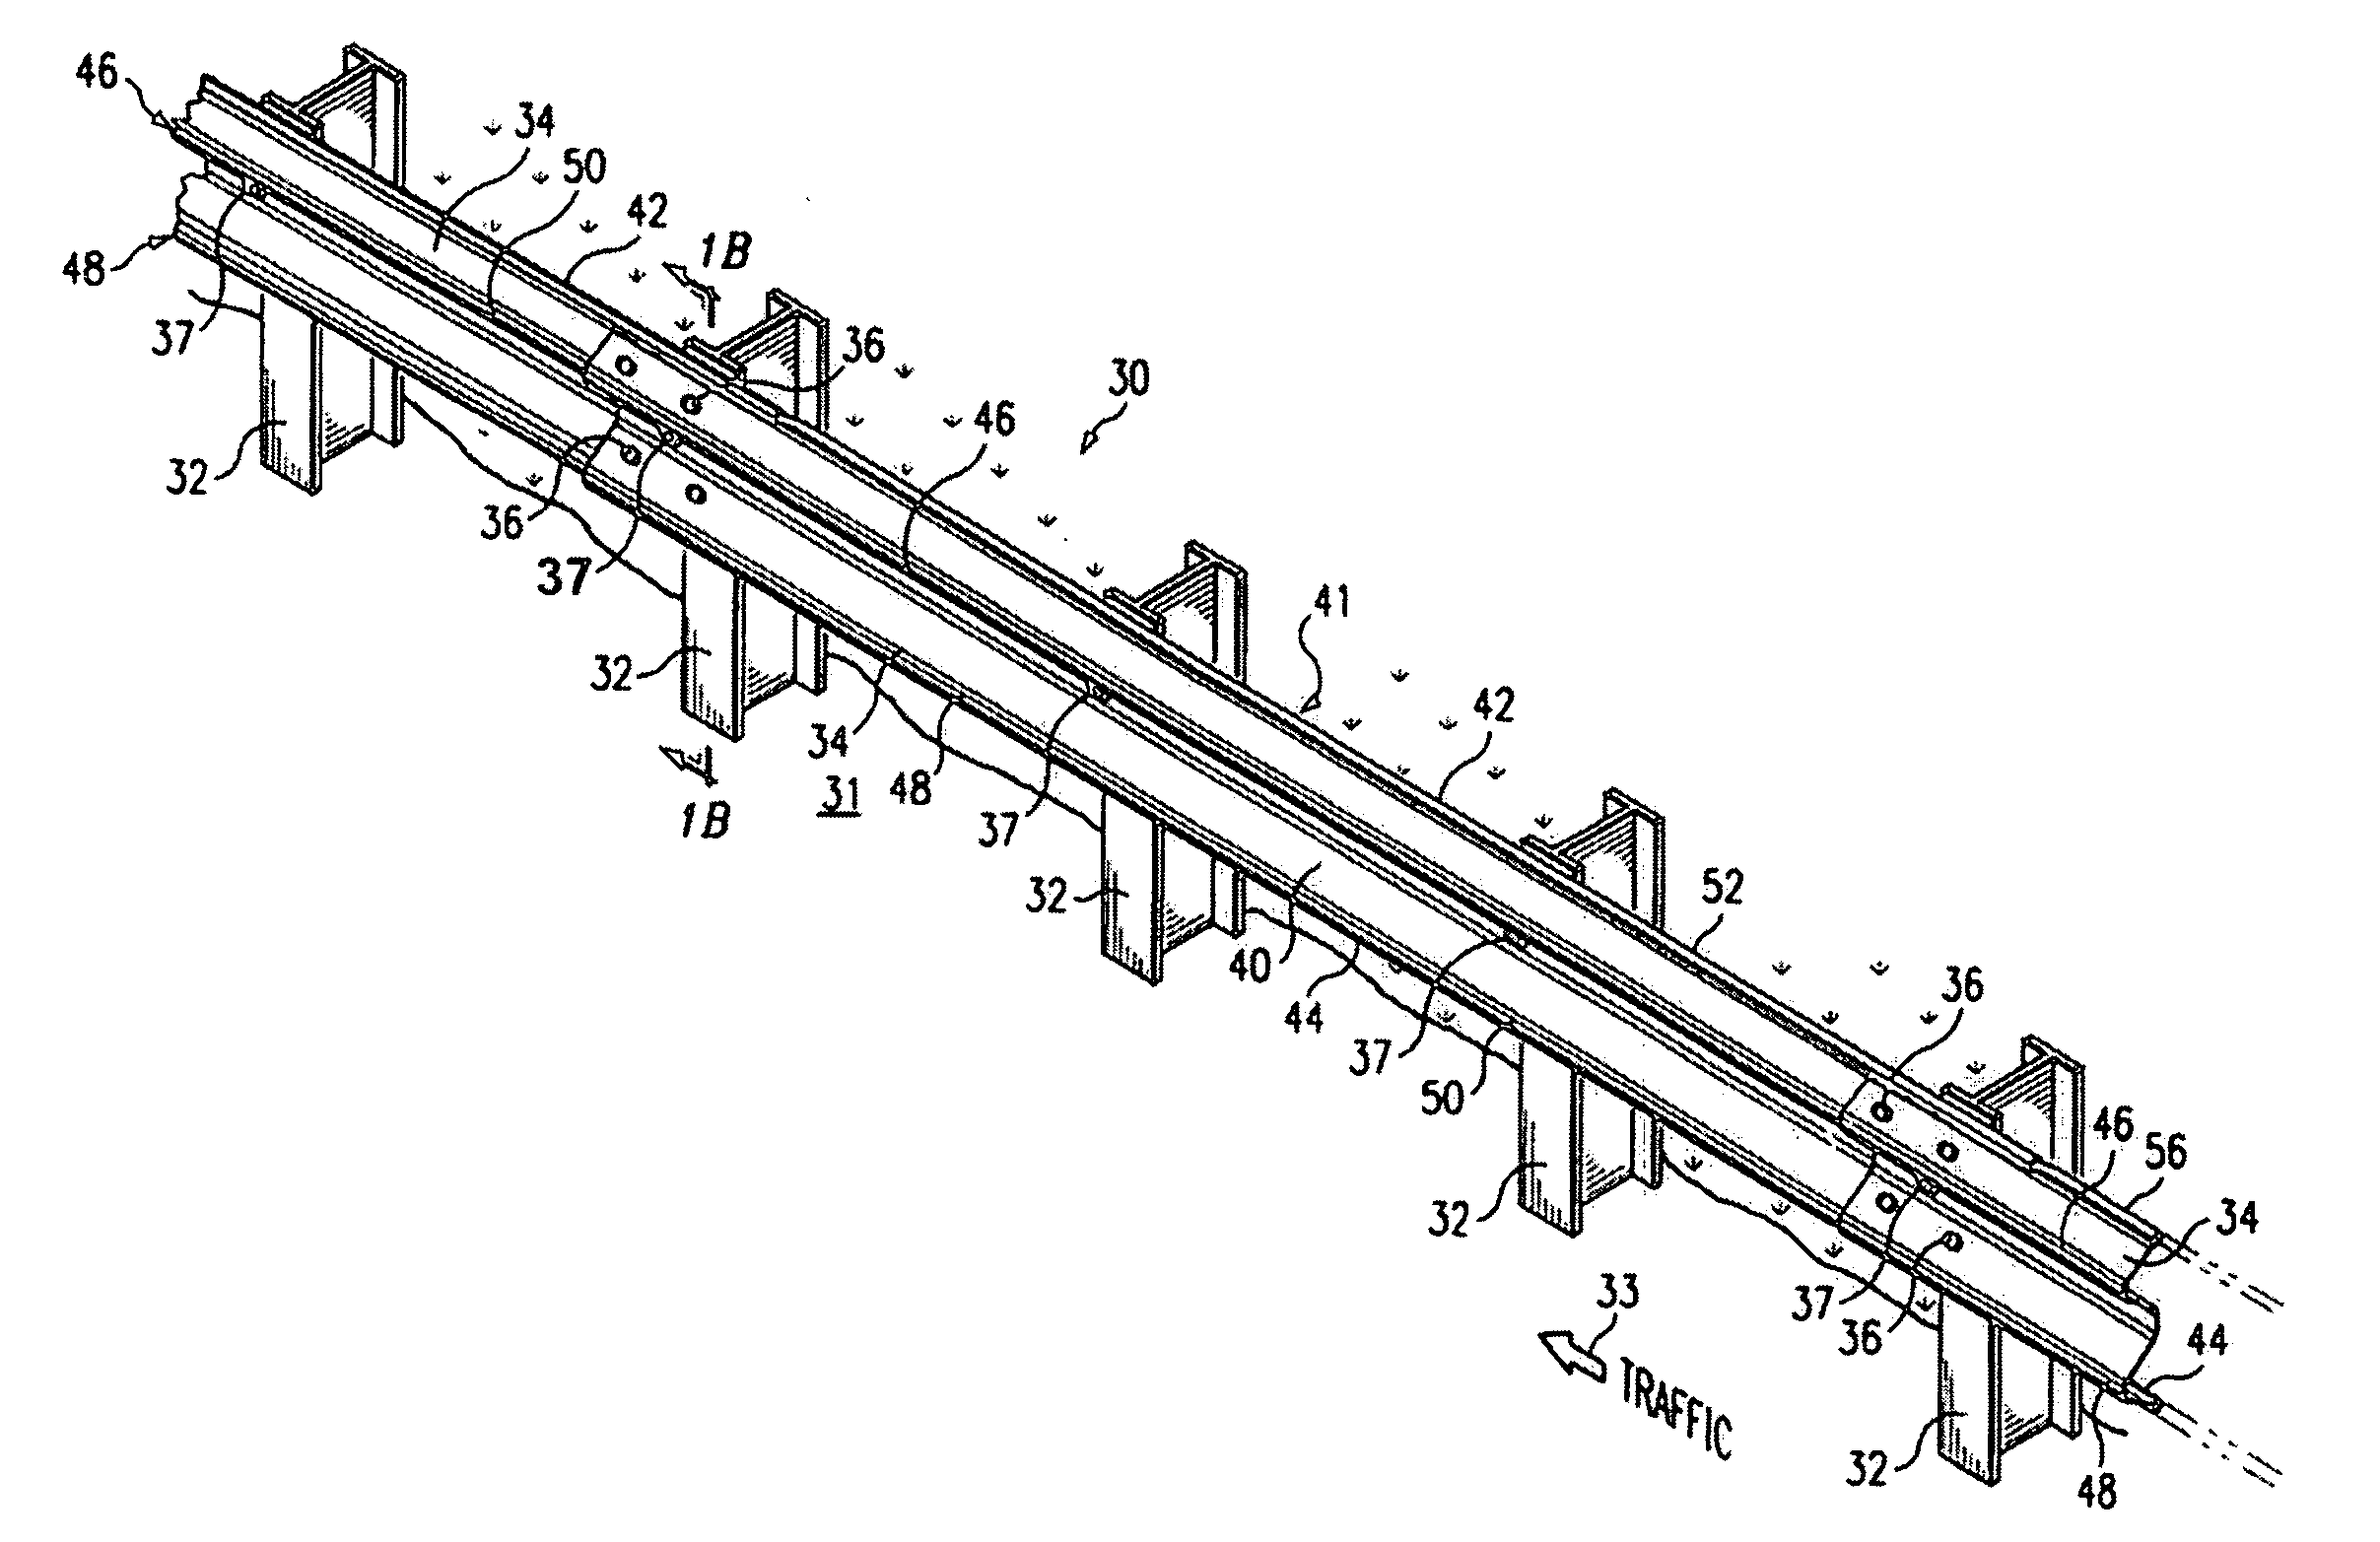 Releasable highway safety structures